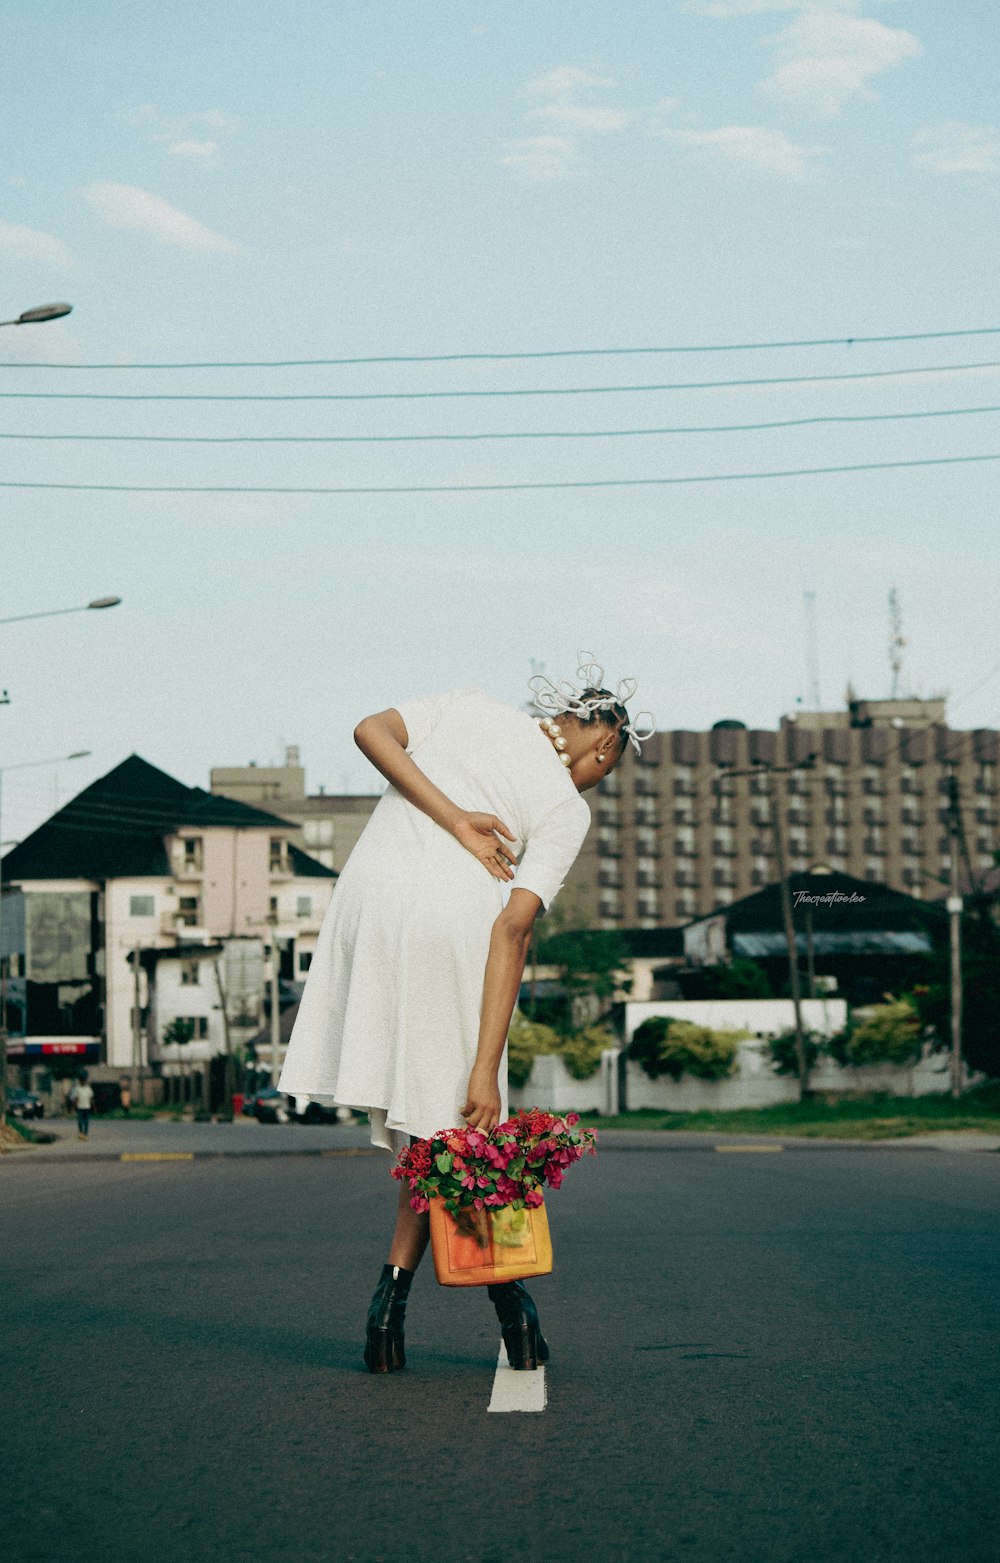 a person in a white dress carrying flowers on a street